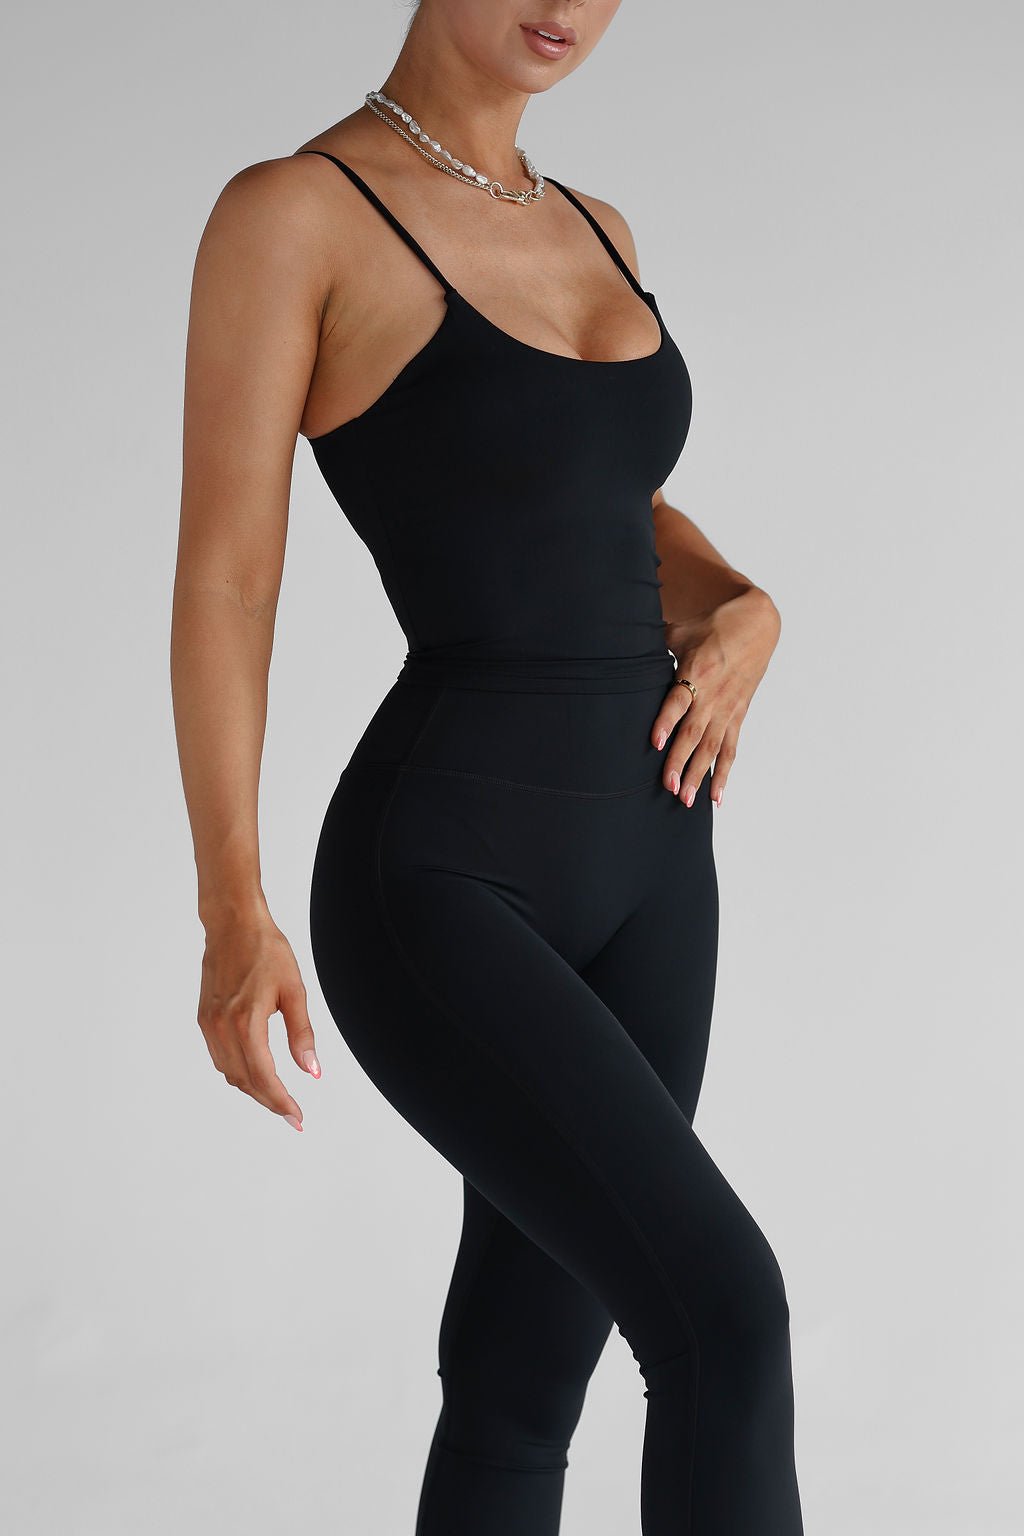 SCULPT Flare Leggings - Black, High Waisted, Squat Proof, 5 Star Rated